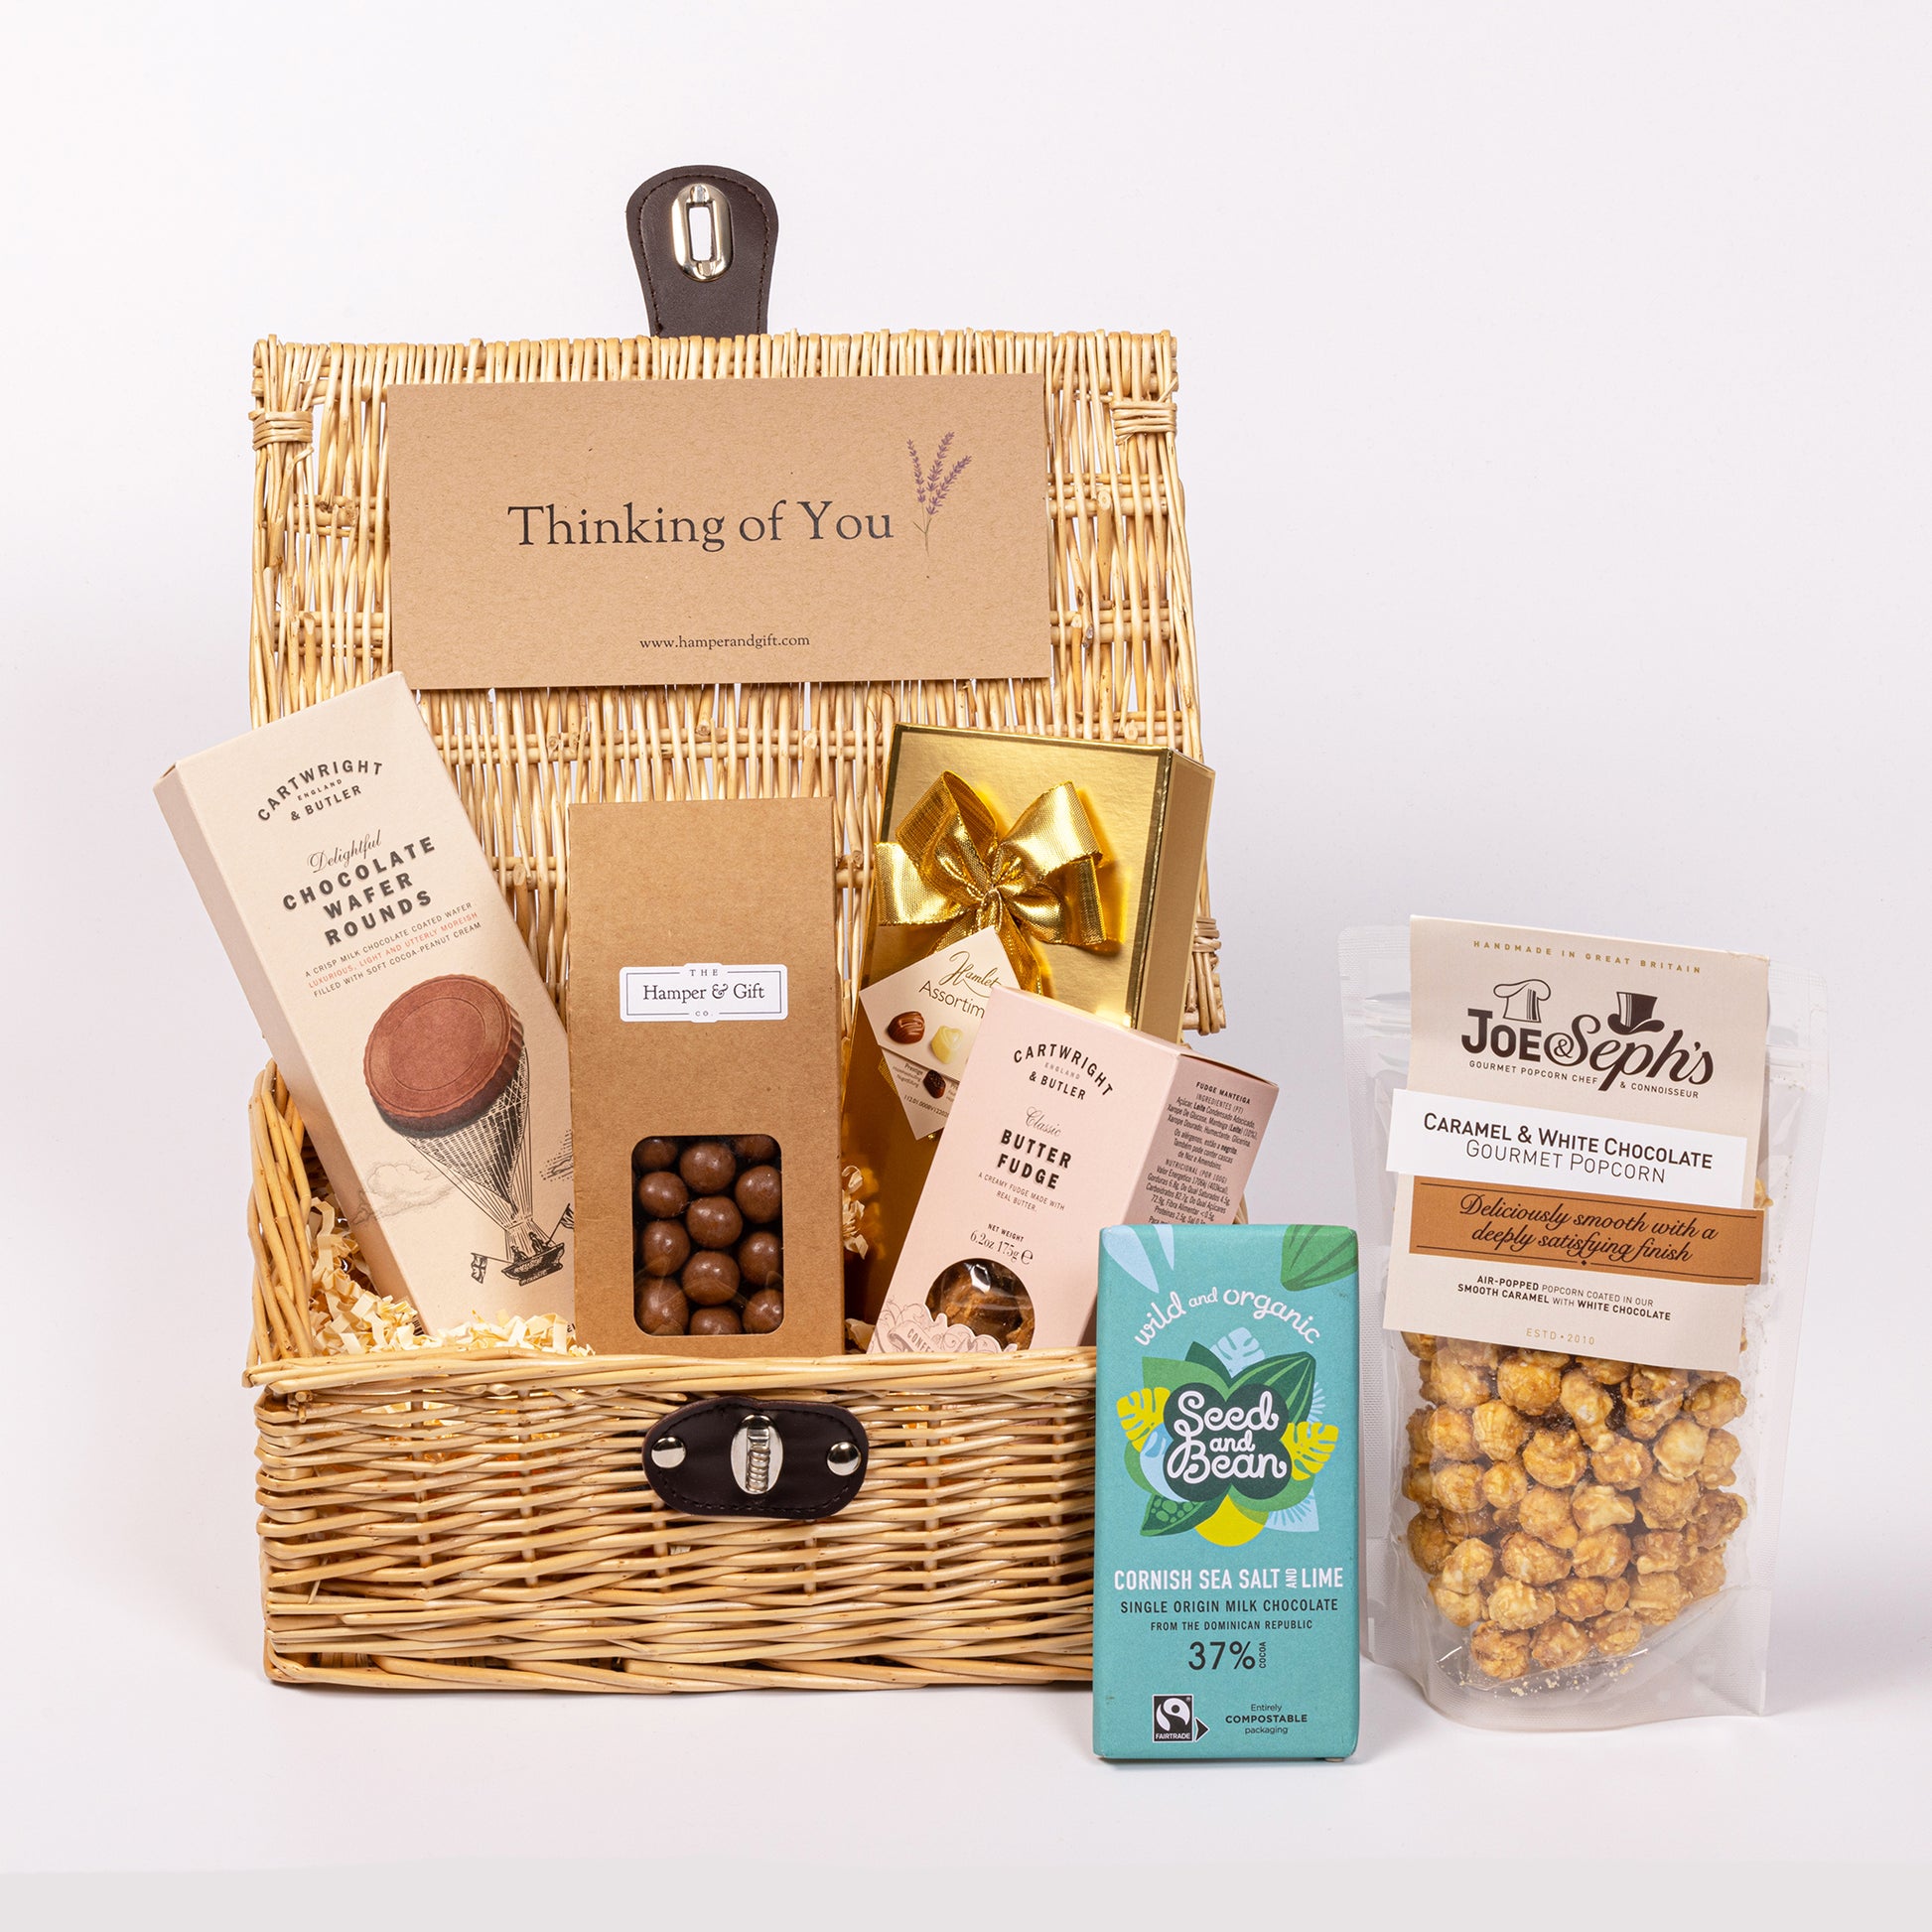 Thinking of You Chocolate & Fudge Hamper filled with a variety of chocolate, fudge, biscuit and gourmet popcorn